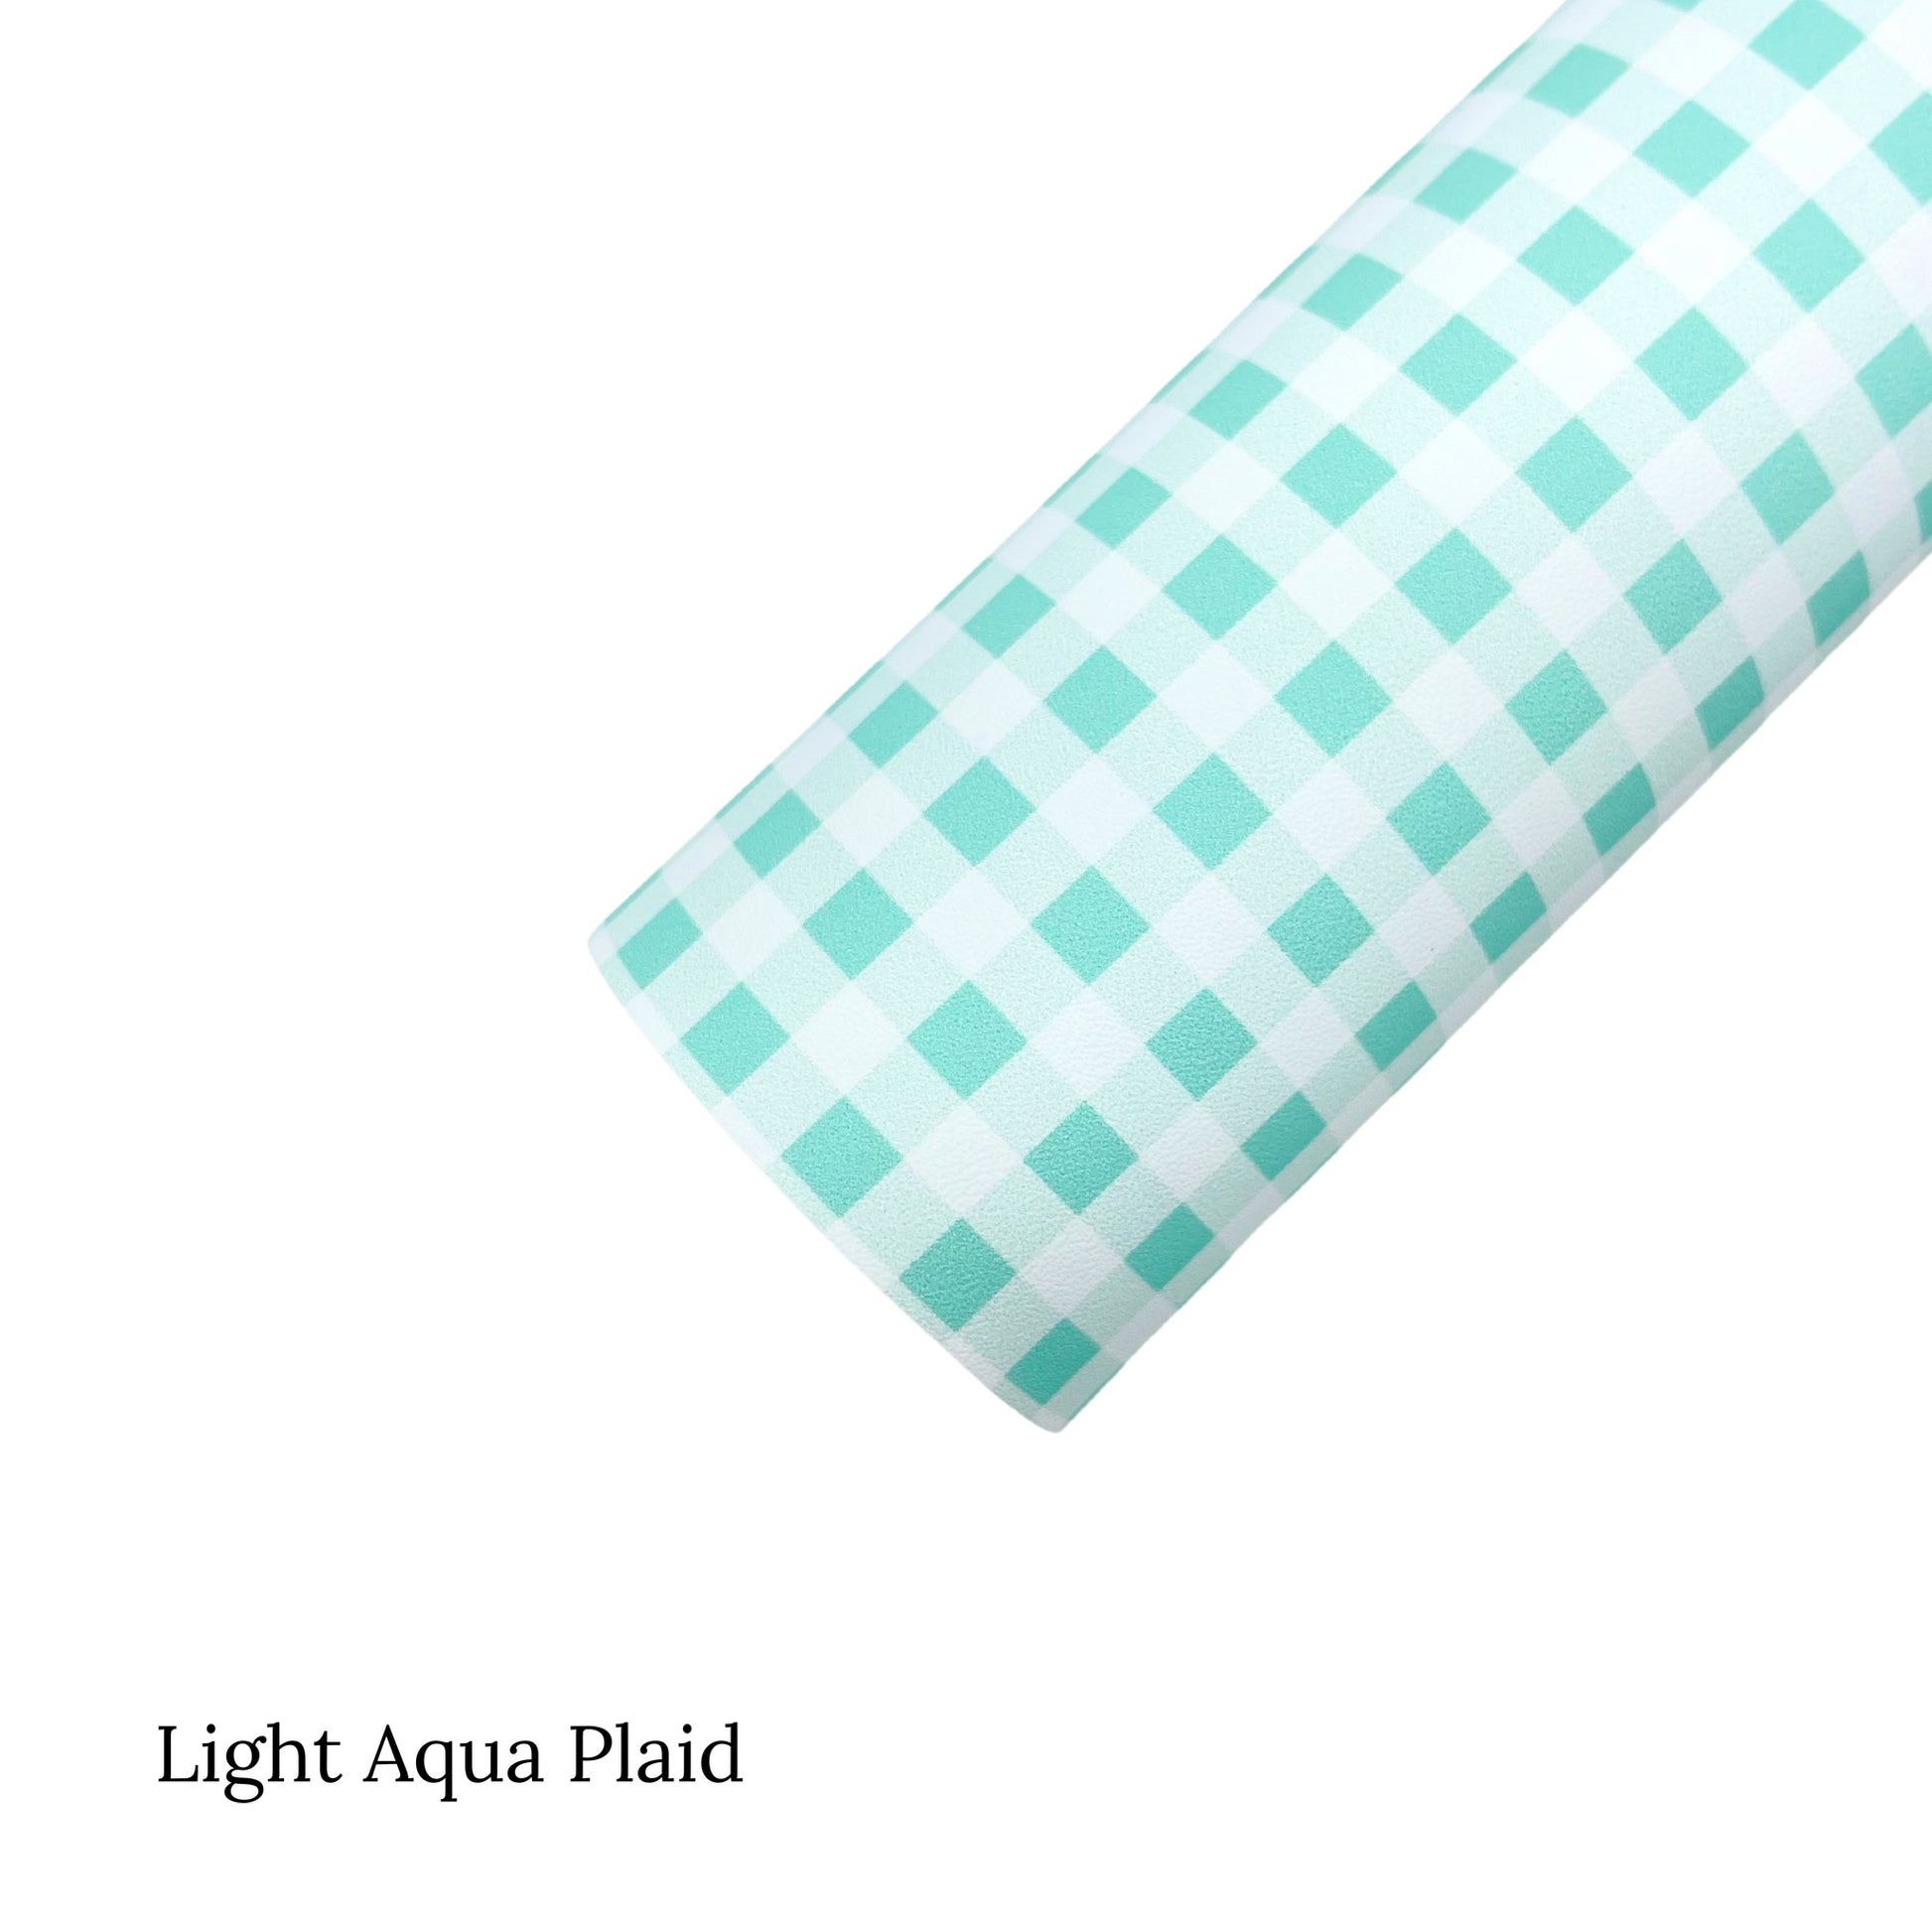 Spring meadow pattern faux leather sheets. Light aqua plaid pattern faux leather sheet. 